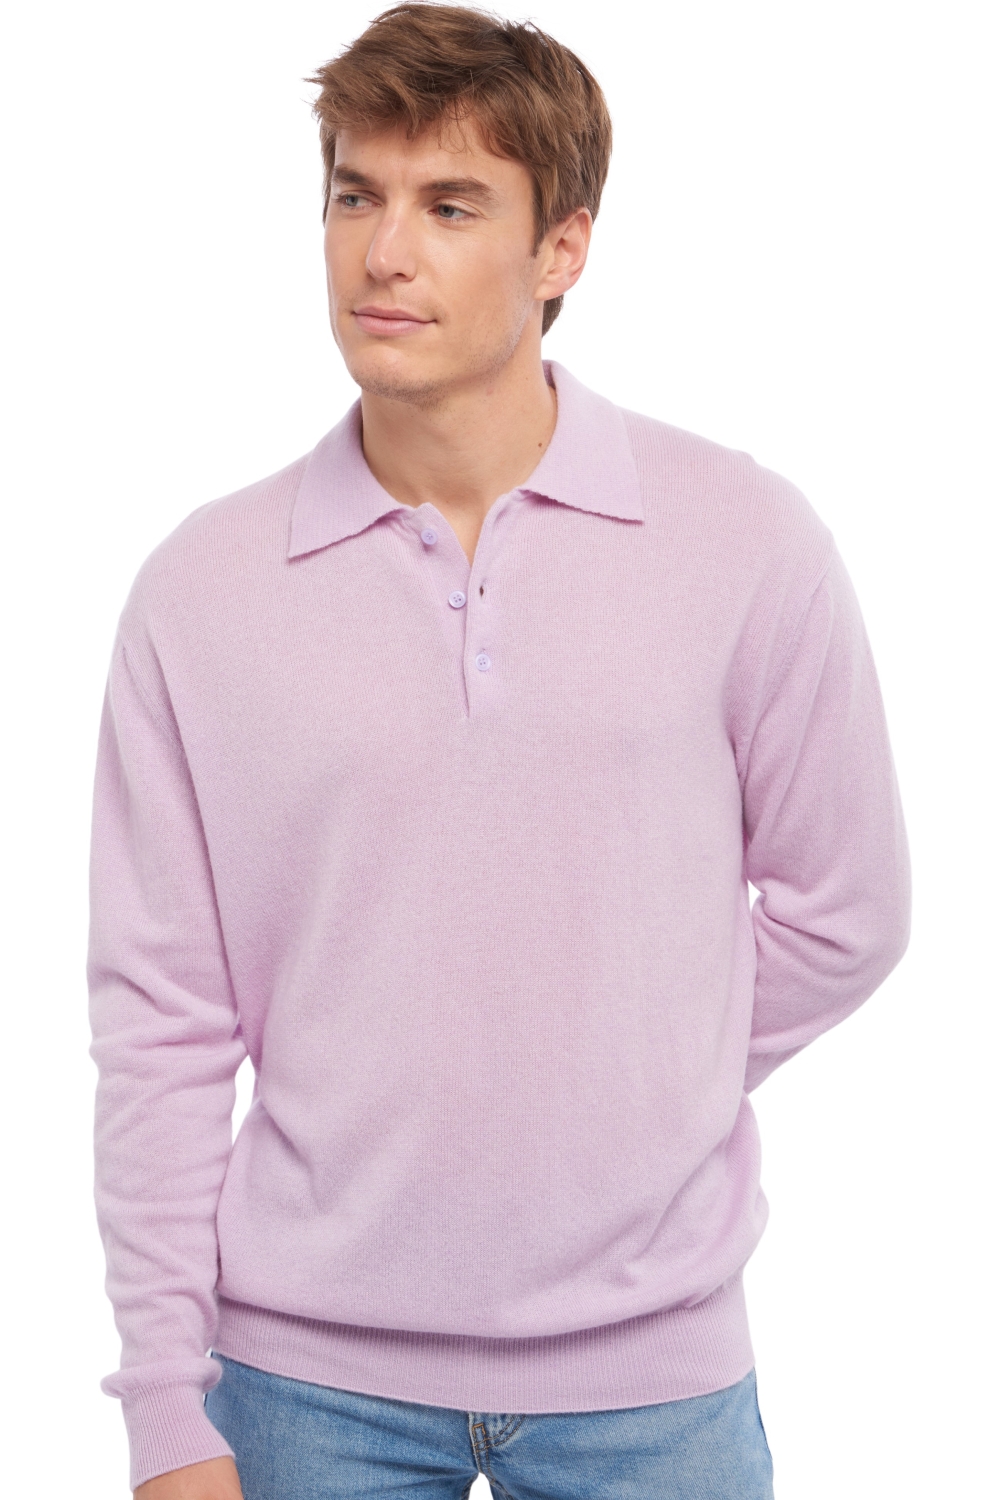 Cashmere men polo style sweaters alexandre lilas 3xl